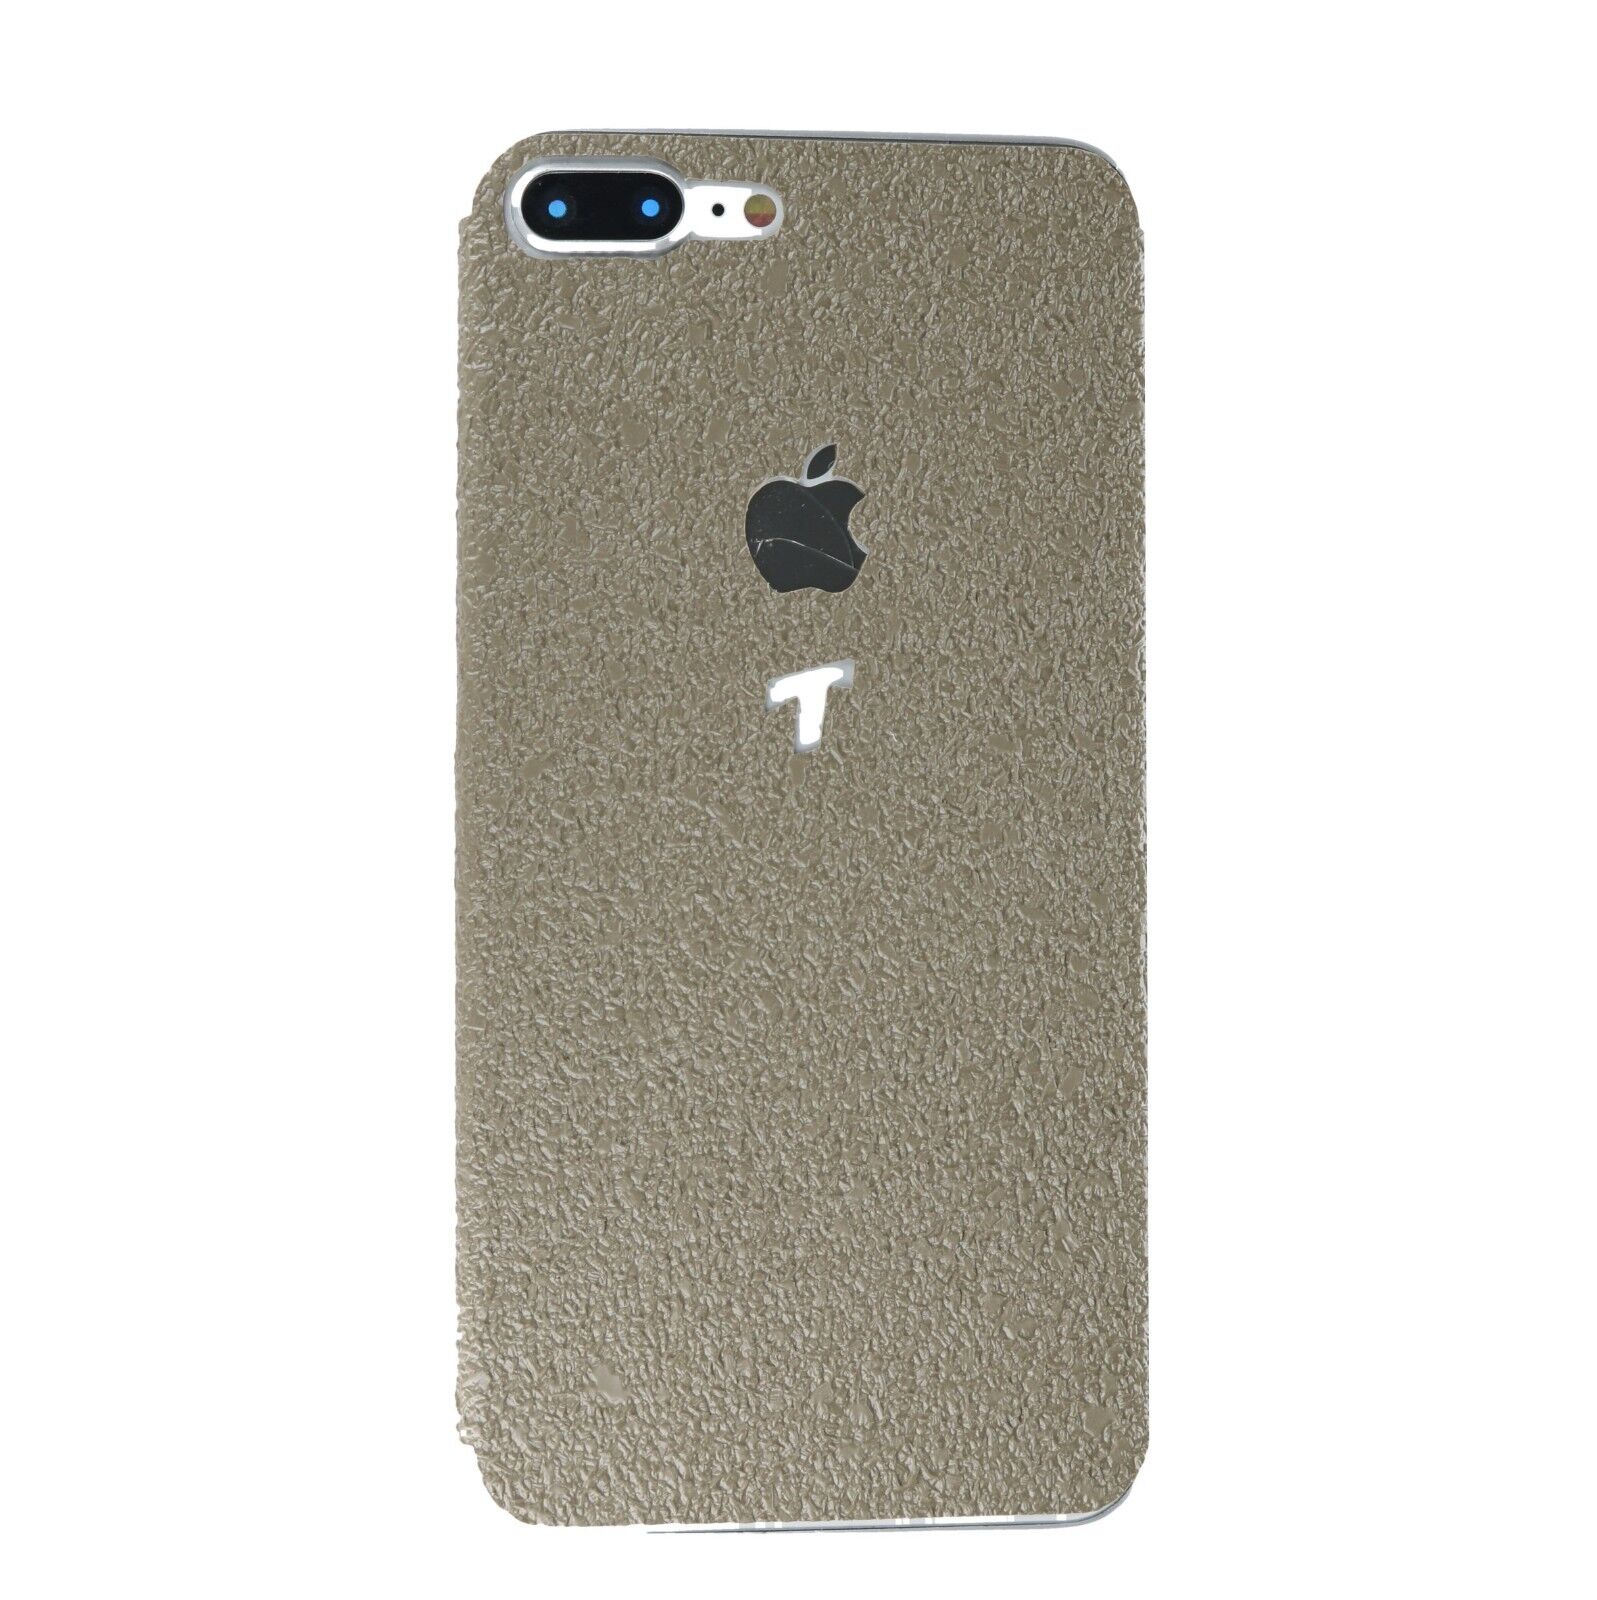 Talon Grips for Apple iPhone6+ in Moss Rubber Texture 172M